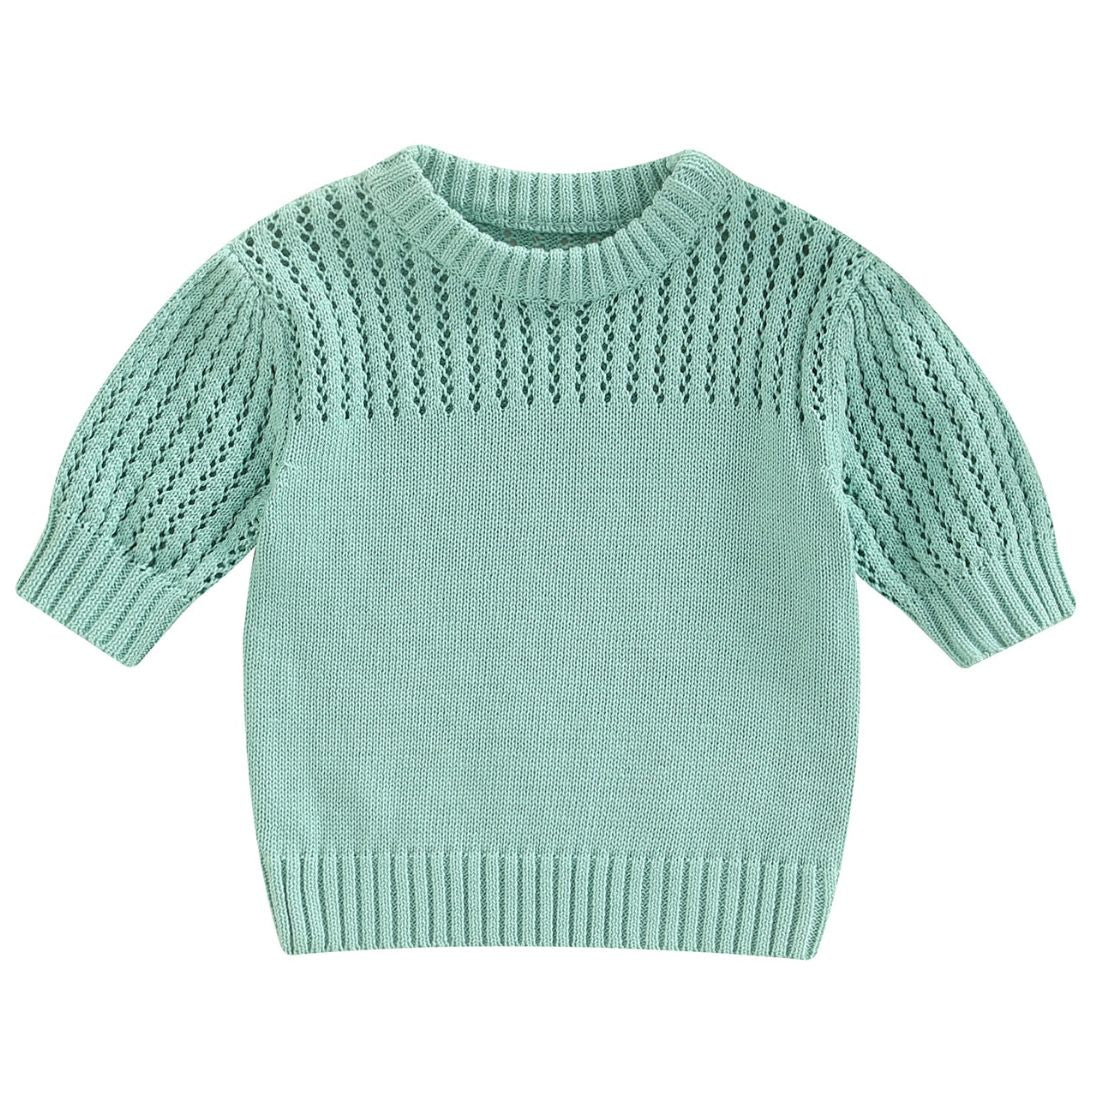 Little Girl Amira Knit Sweater - My Trendy Youngsters |Buy on-trend and stylish Baby and Toddler Winter apparel @ My Trendy Youngsters - Dress your little one in Style @ My Trendy Youngsters 